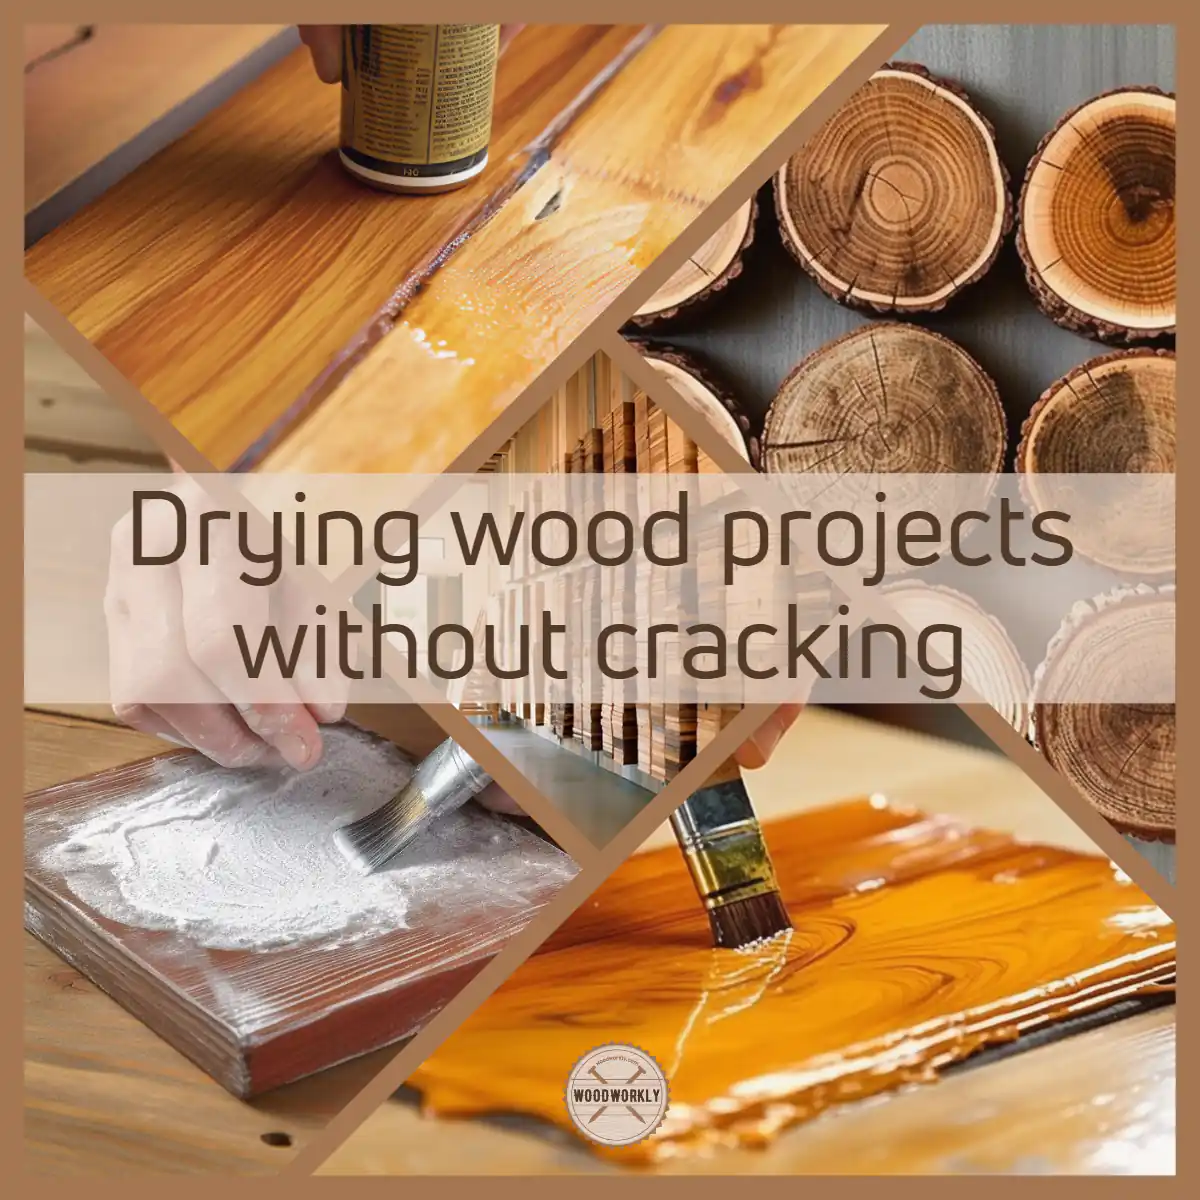 Drying wood projects without cracking